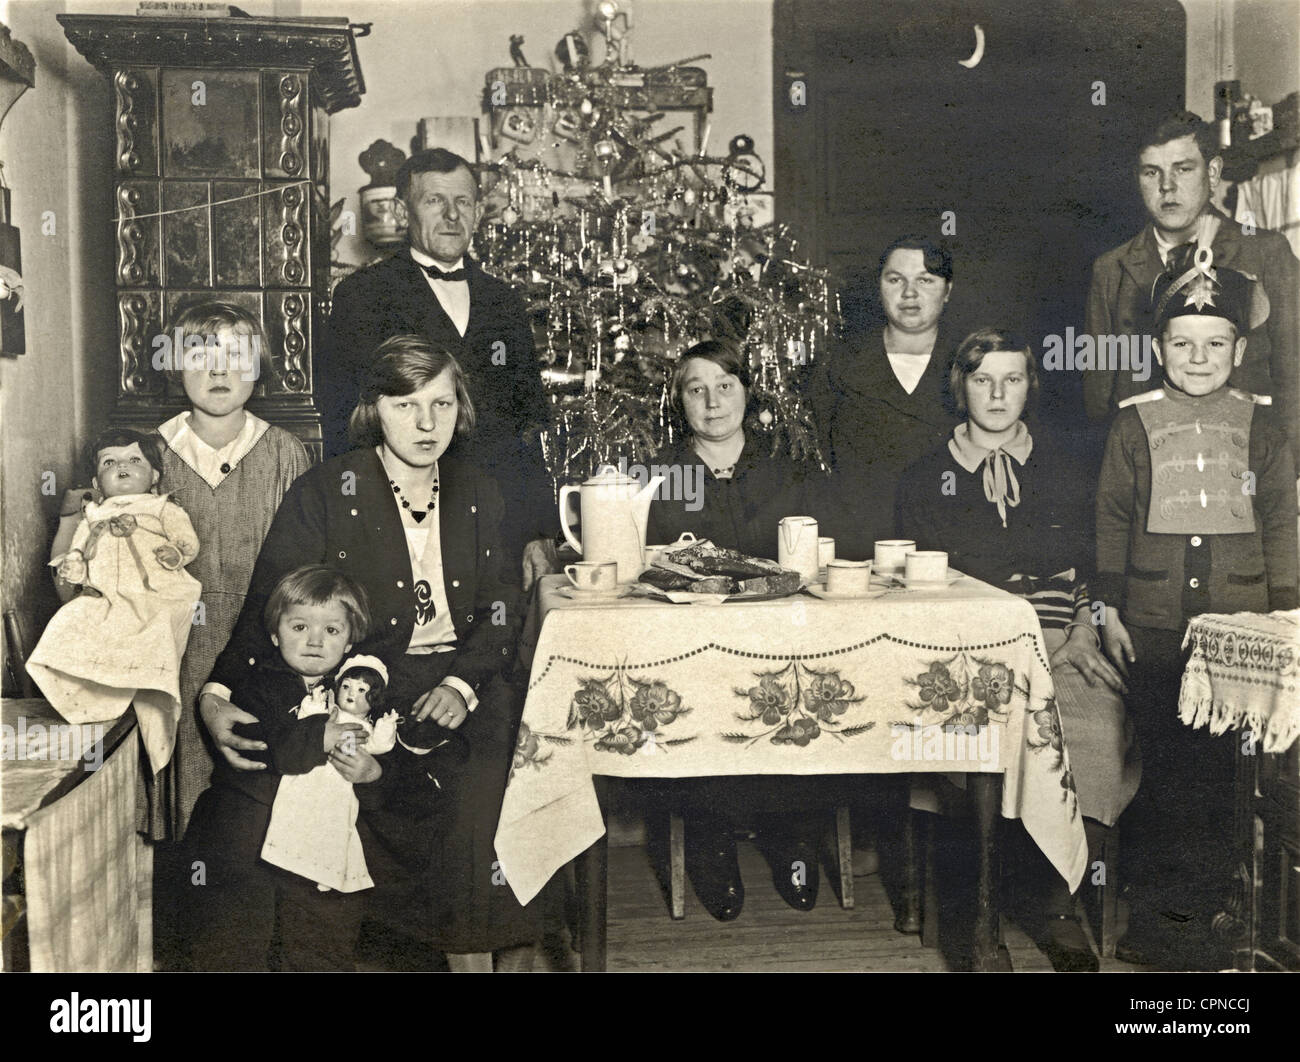 Christmas,family,celebrating together,Germany,circa 1932,parents,parent,married couple,married couples,brides,many,seven,7,child,kids,kid,brothers and sisters,brothers,brother,sister,sisters,people with many children,a family blesed with a large number of children,coffee table,coffee tables,fir tree,fir trees,festive,feastful,festal,decorated,Christmas tree,Christmas trees,Christmas presents,Christmas gifts,tree,trees,tight,strait,little,small,flat,housing conditions,room,rooms,parlour,tiled stove,tiled stoves,dis,Additional-Rights-Clearences-Not Available Stock Photo